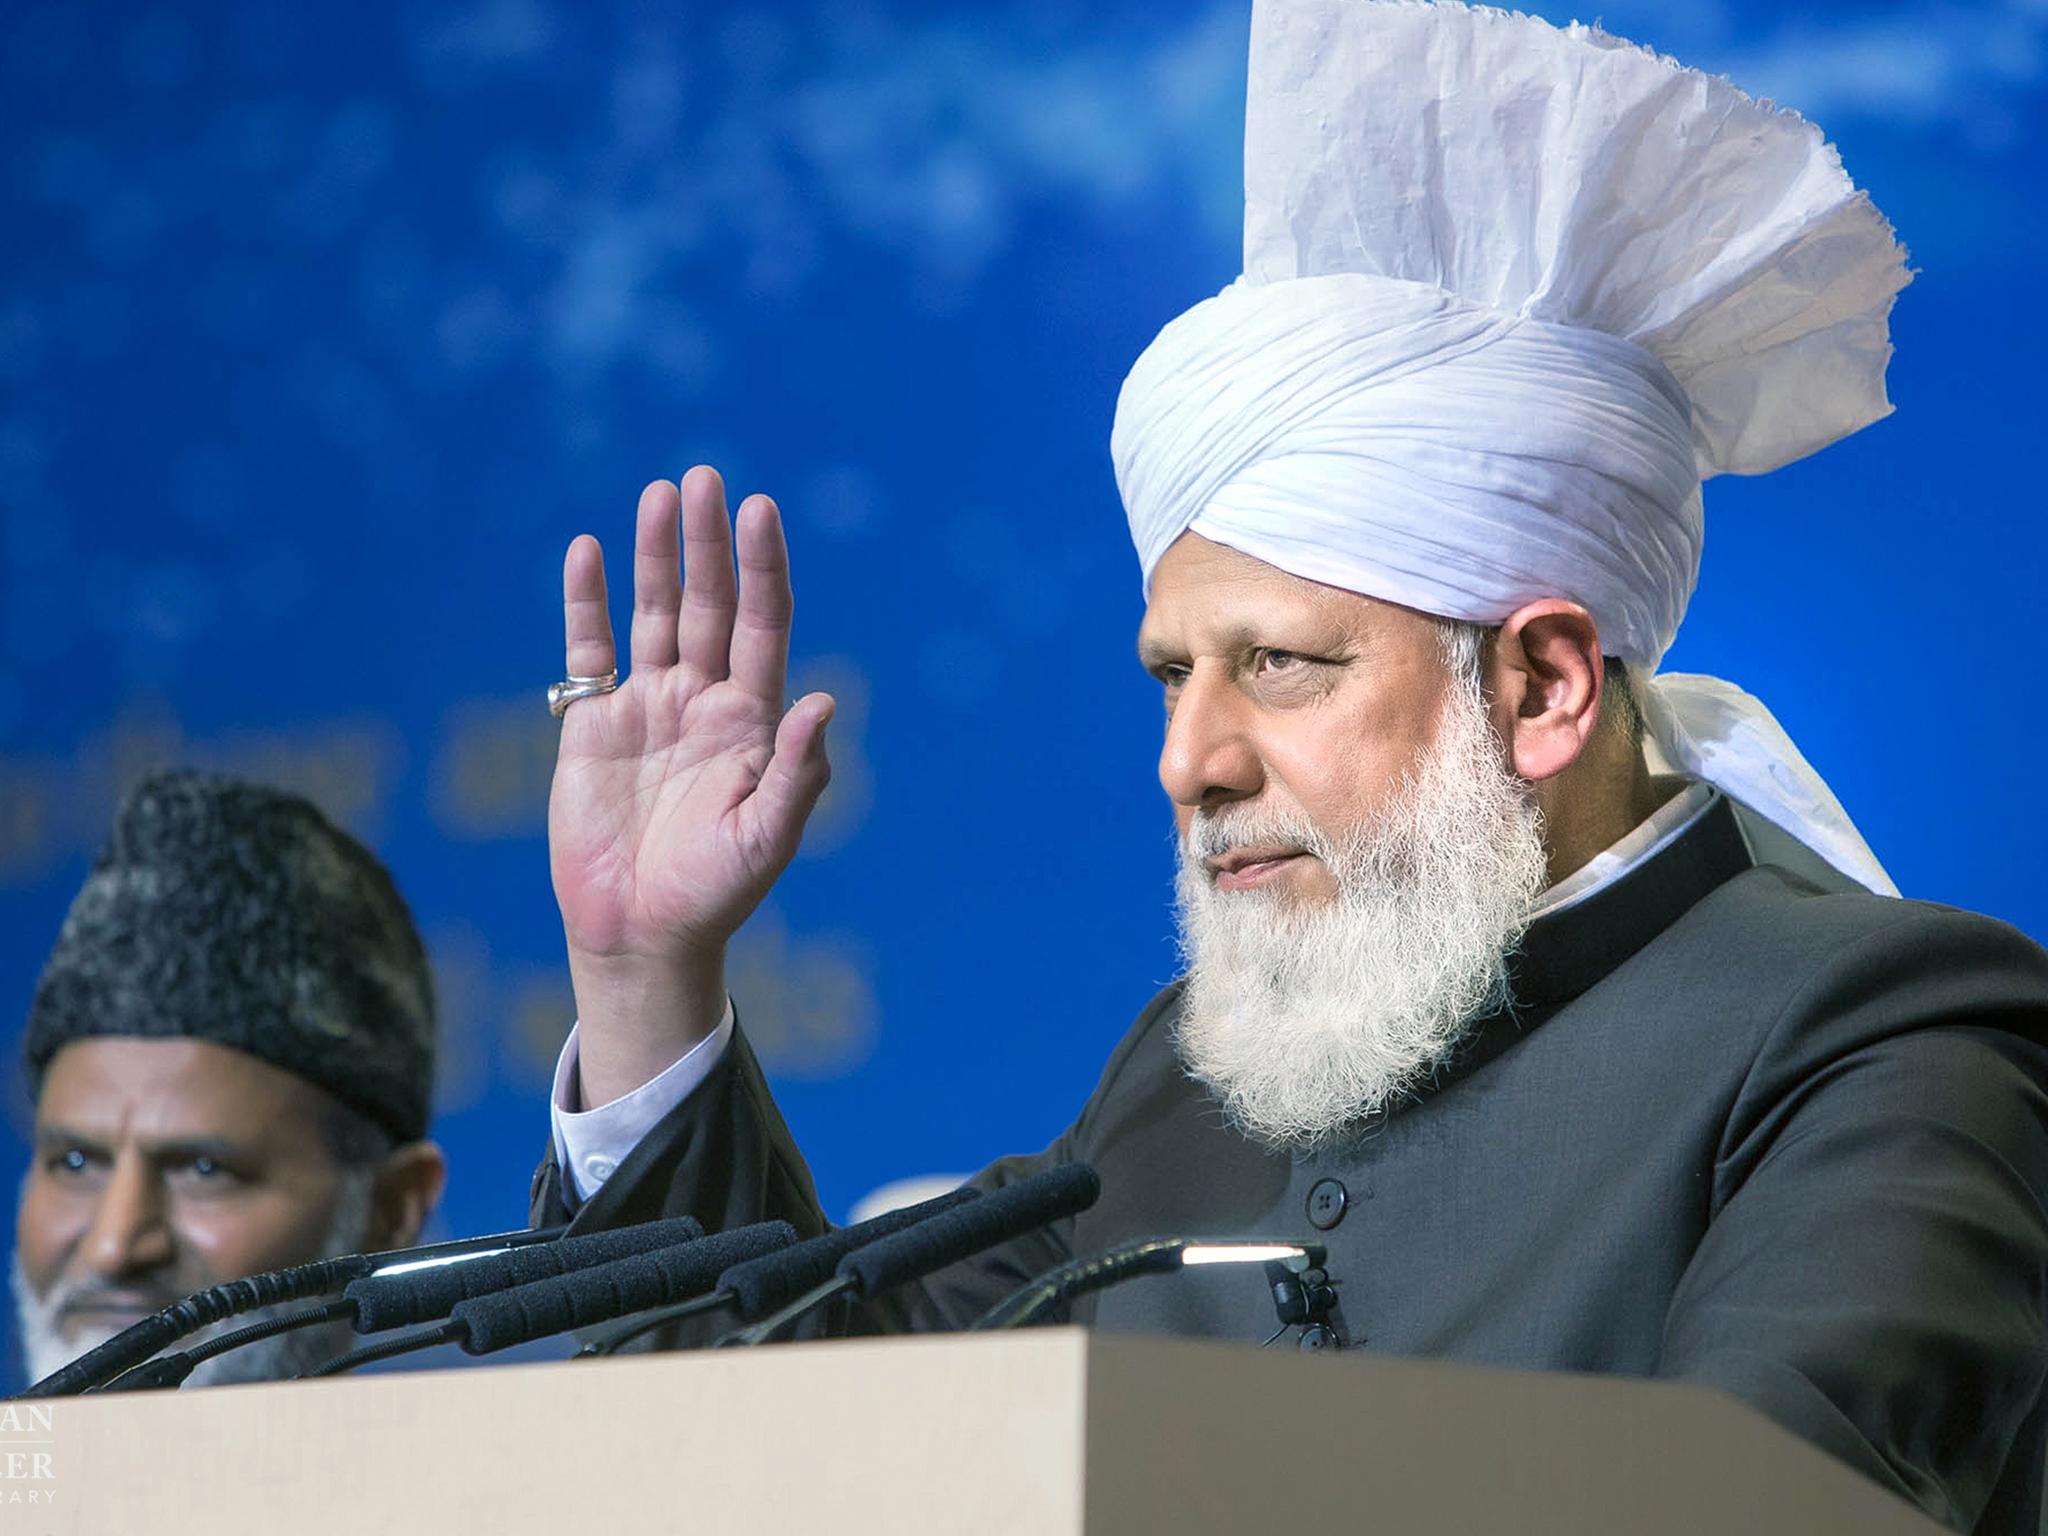 The Caliph told the Ahmadiyya conference that people should live by the message 'Love for all, hatred for none' (Makhzan-e-Tasaweer )